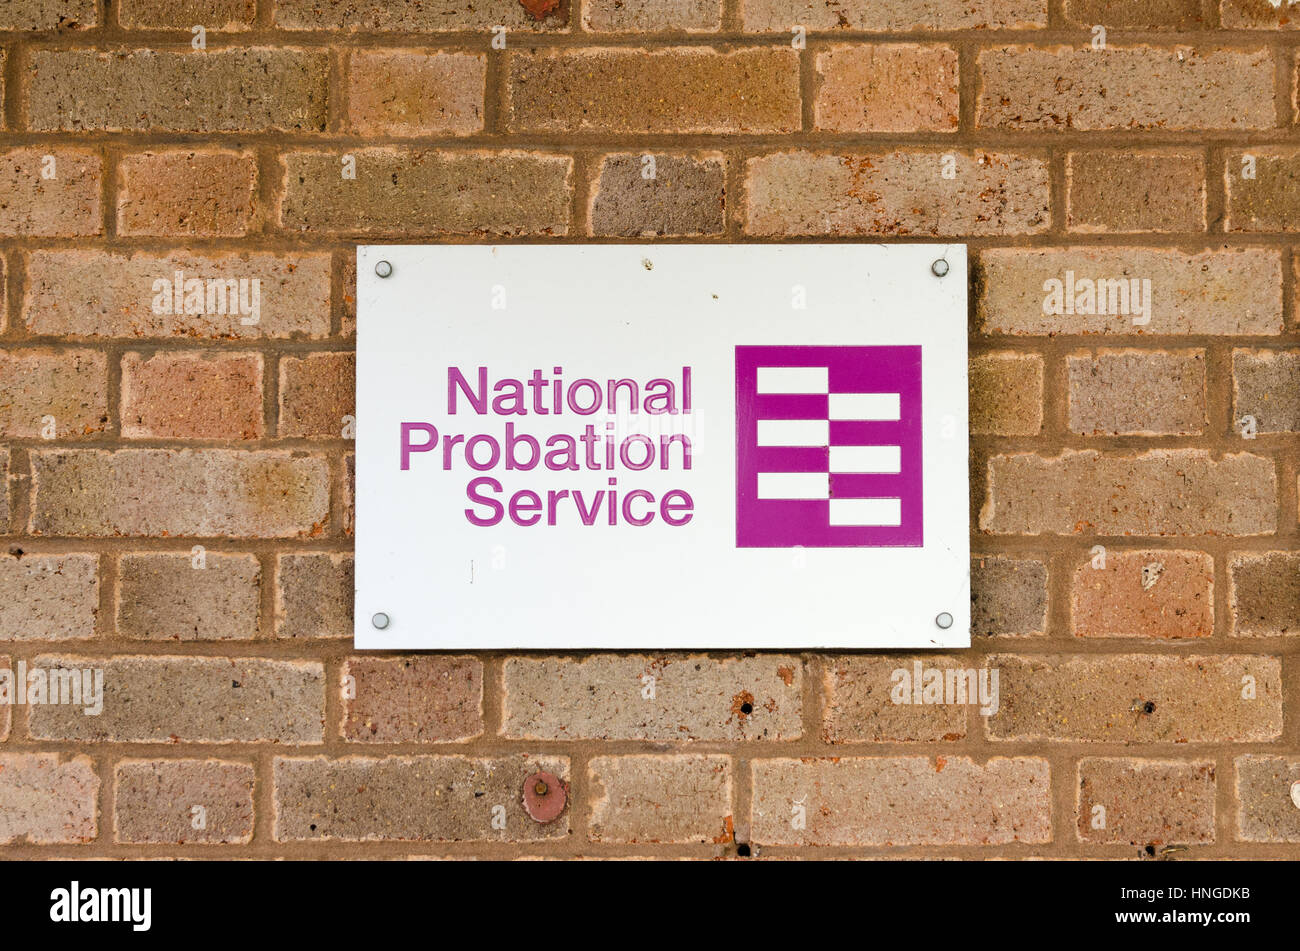 National Probation Service sign on brick wall Stock Photo